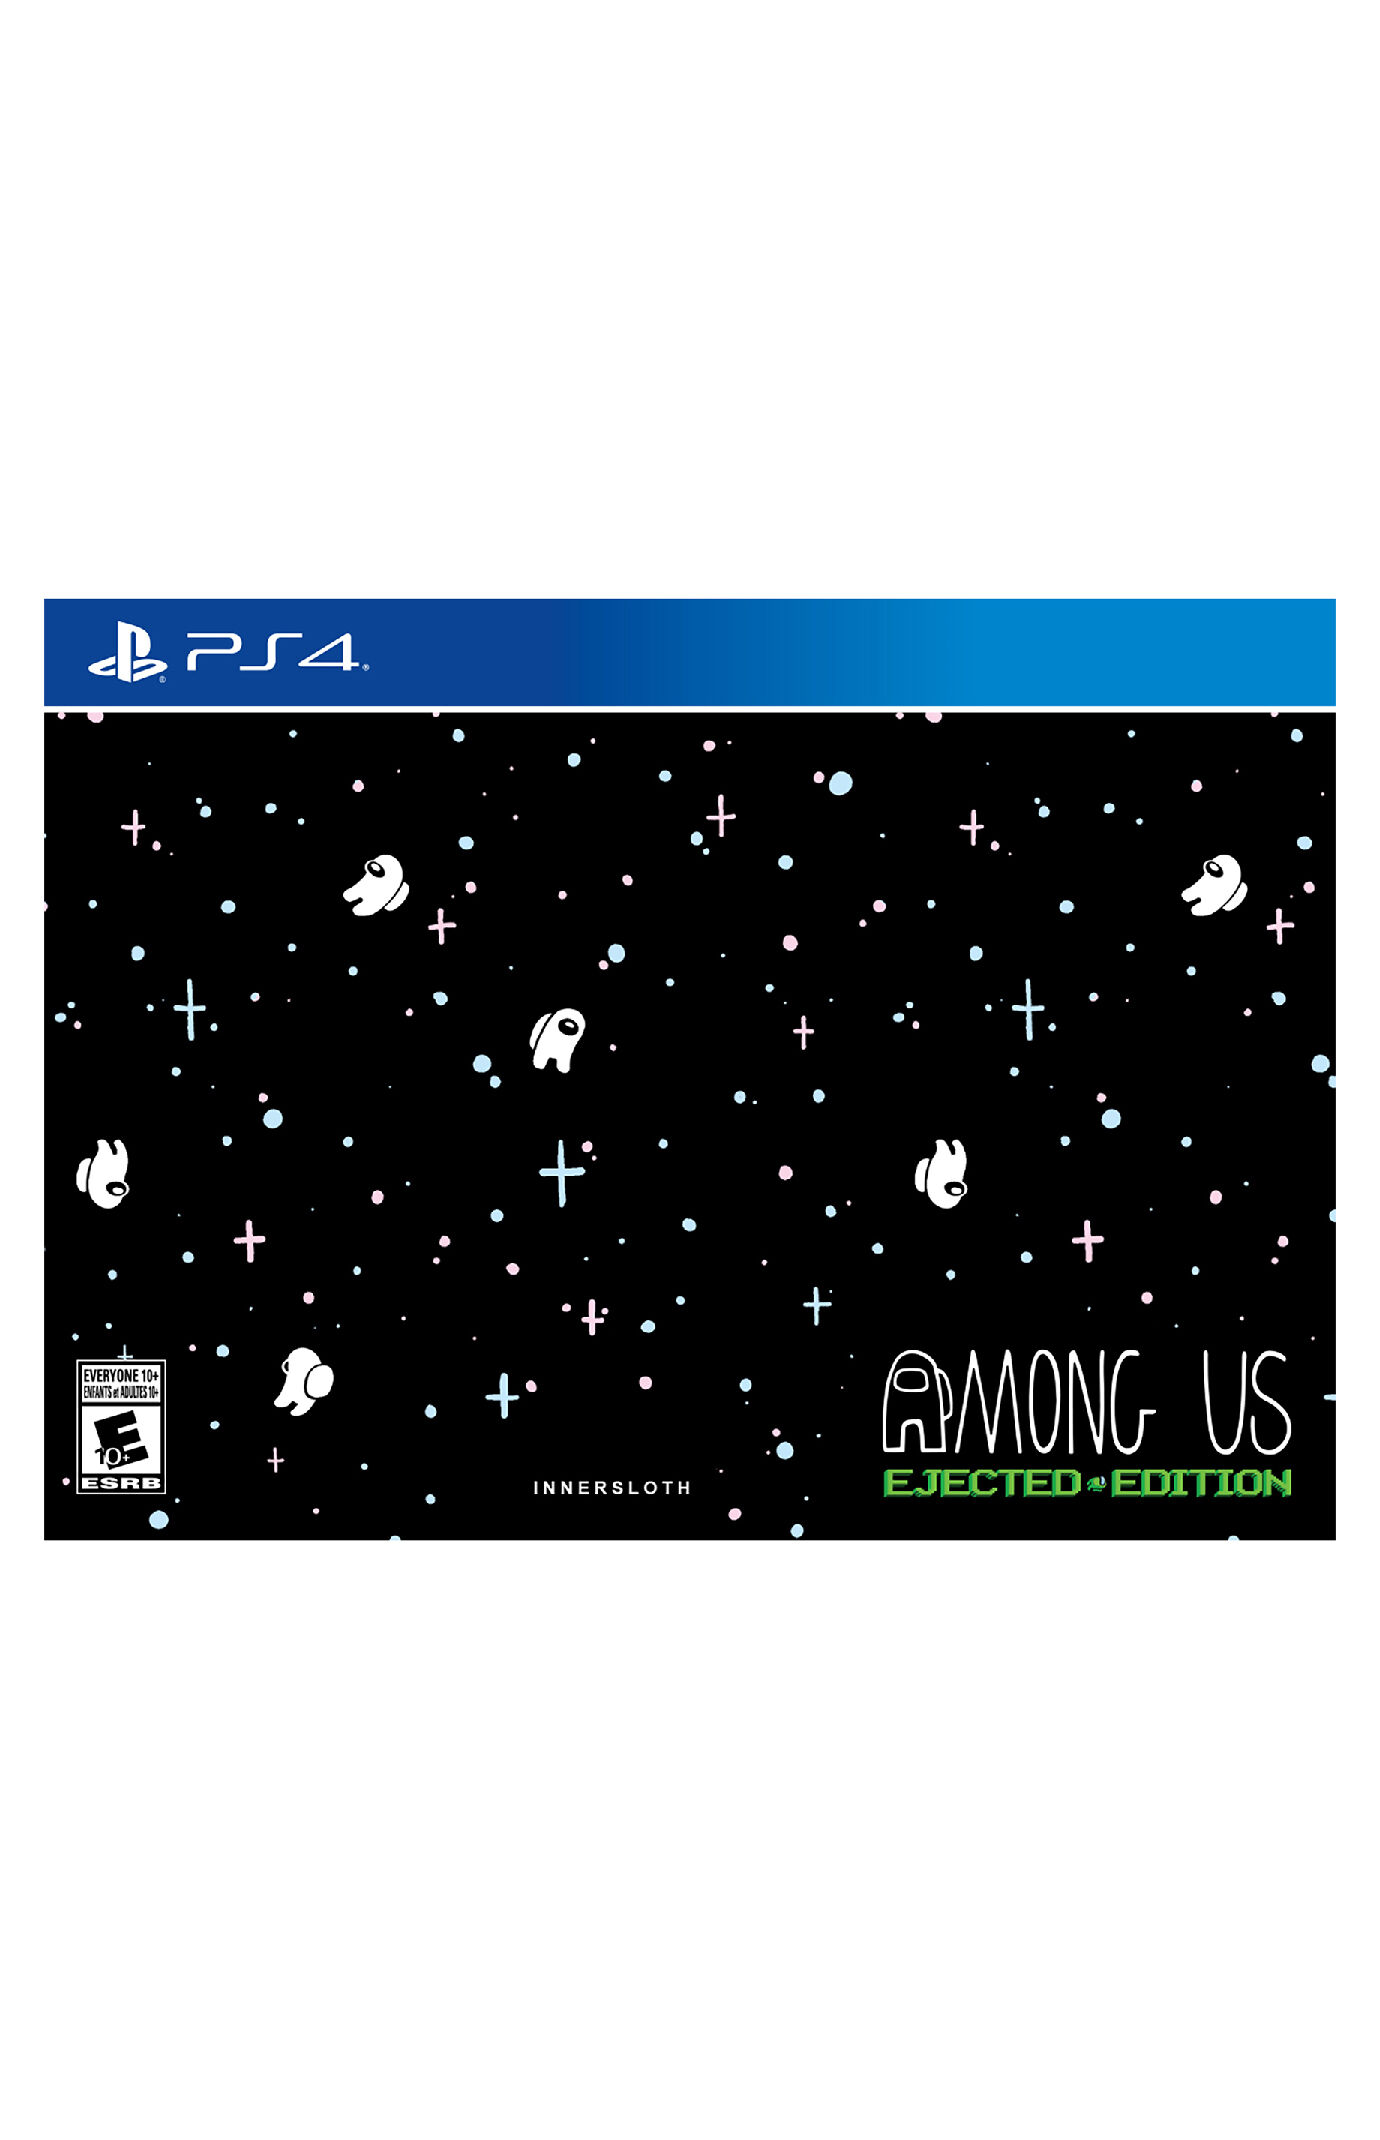 Among Us: Ejected Edition for PlayStation 4